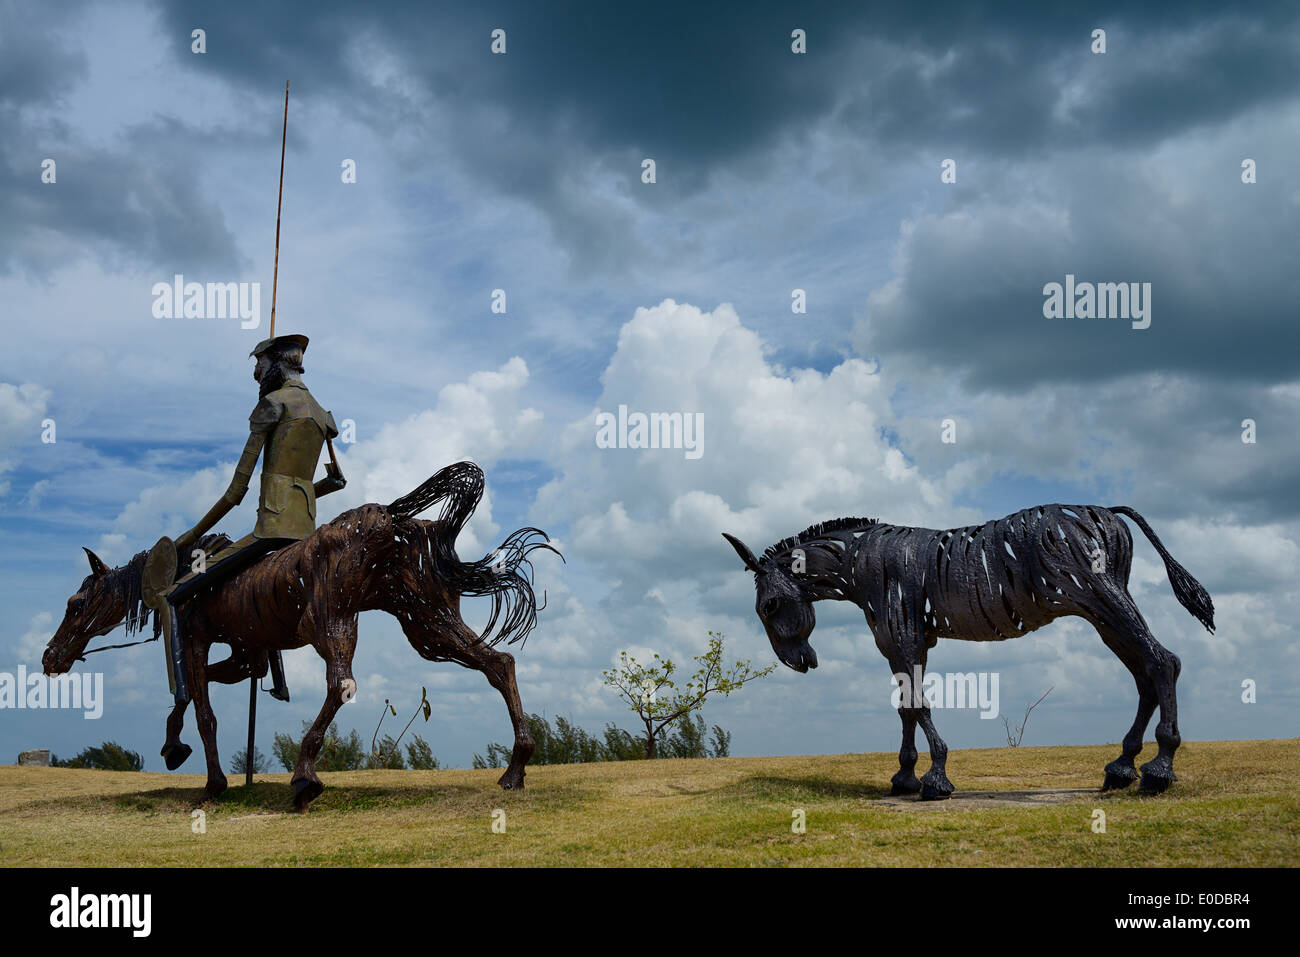 Steel sculpture of Don Quixote with lance and shield on horseback with pony in Varadero Cuba Stock Photo